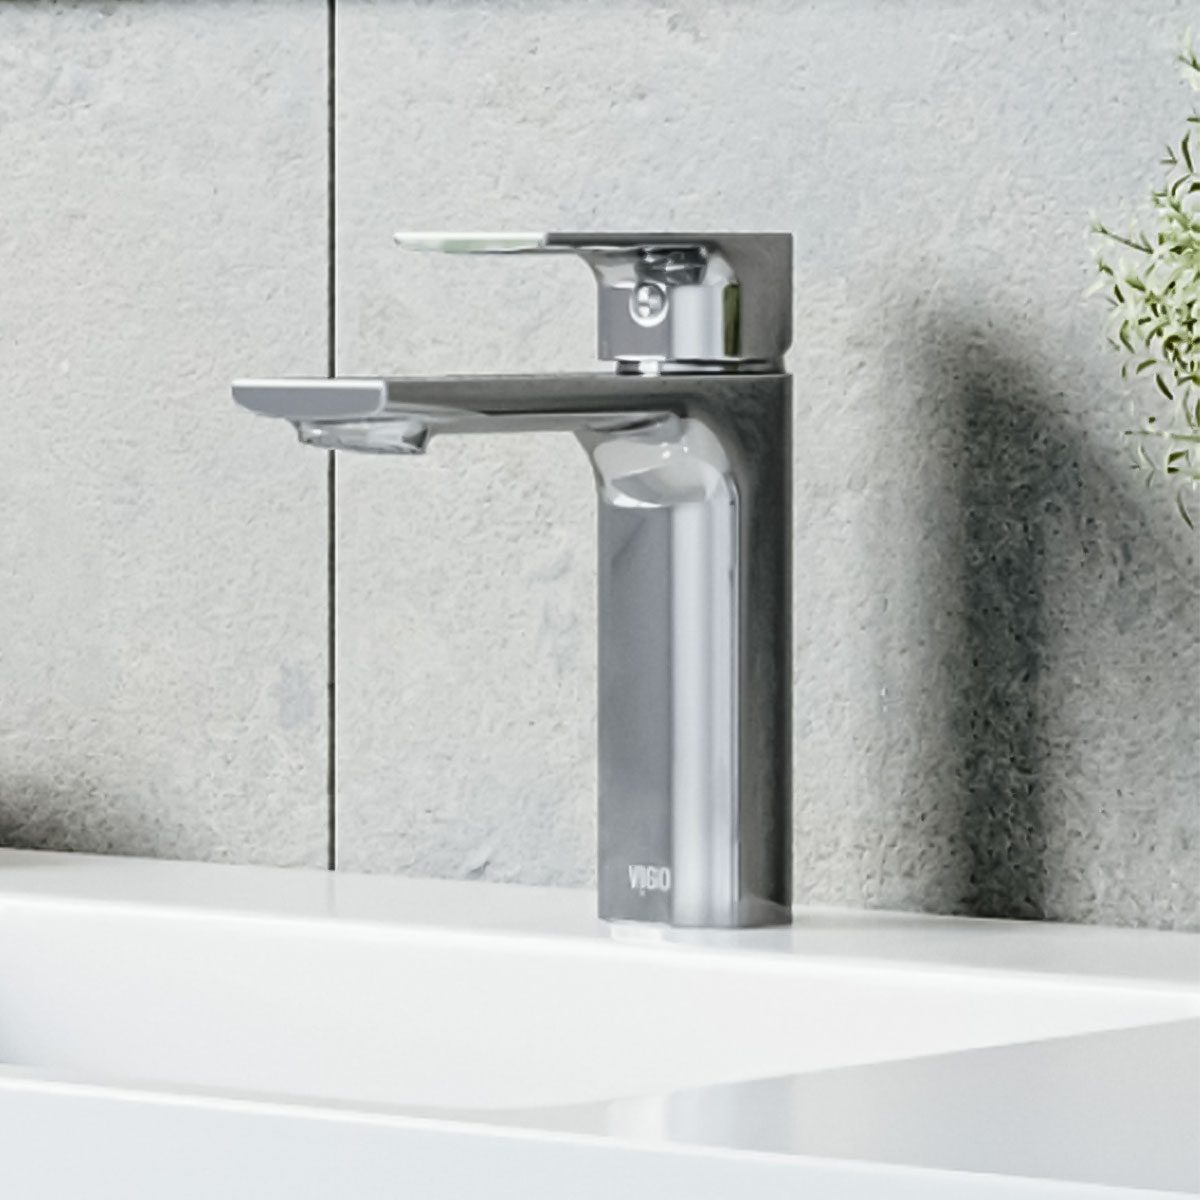 Best Bathroom Sink Faucet Brands for Every Style & Budget